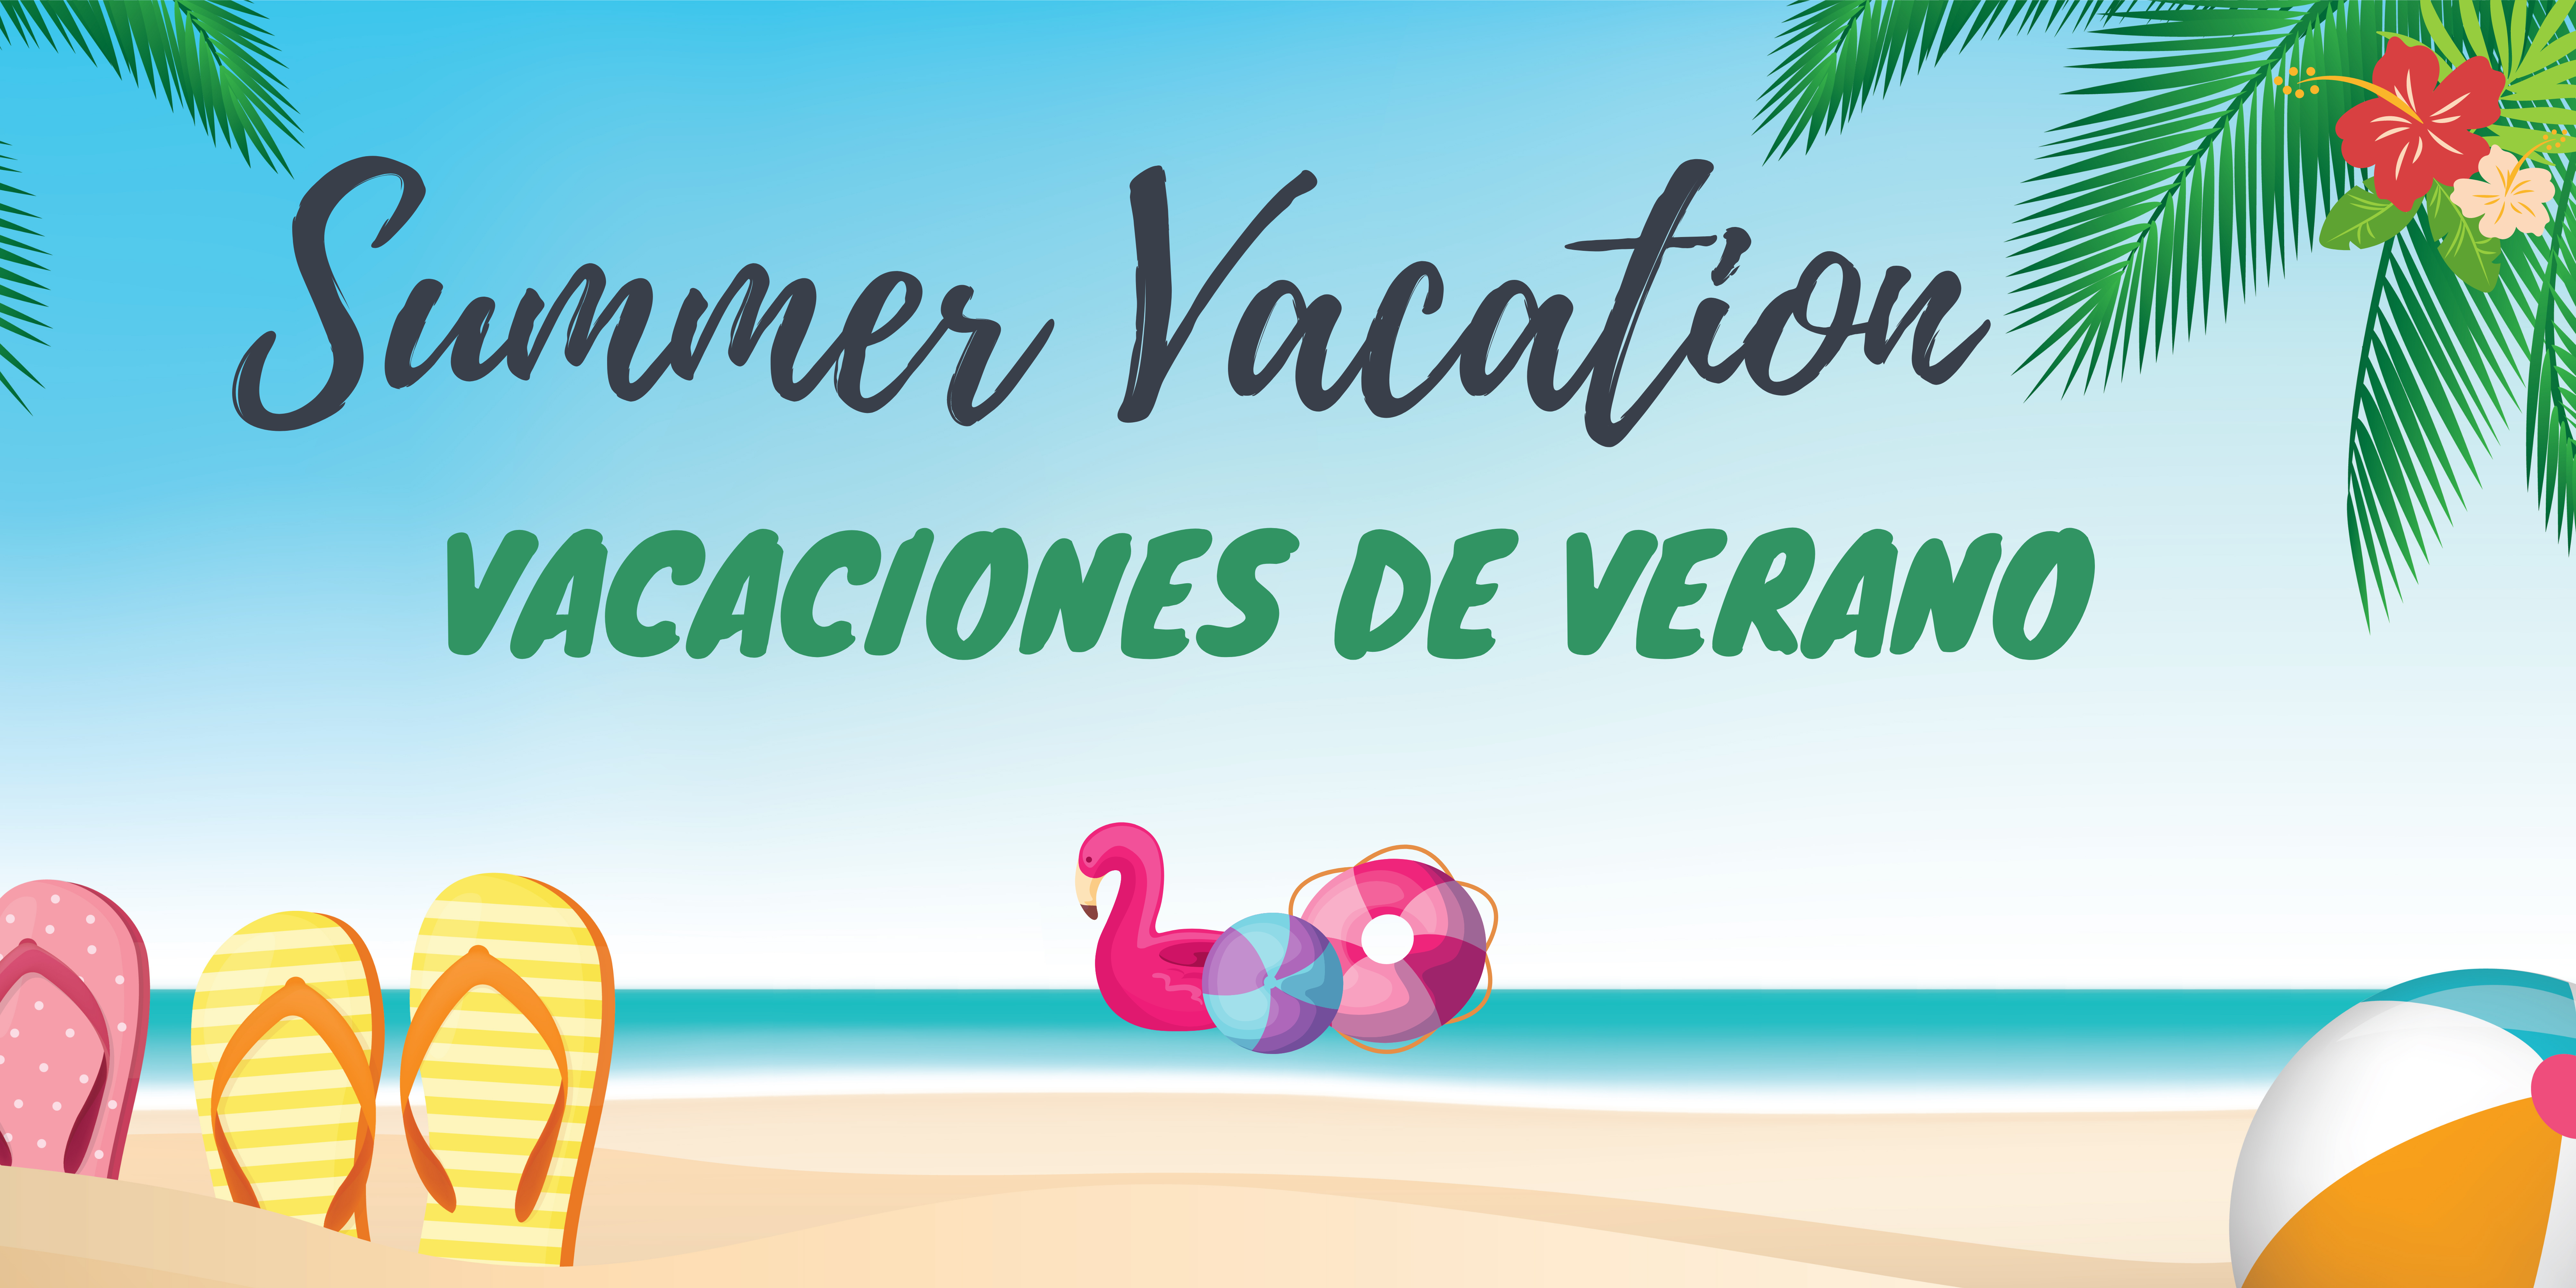 Image of a beach scene with sand, water, flip-flops and beach toys. Text says, "Summer Vacation" and "Vacaciones de verano"